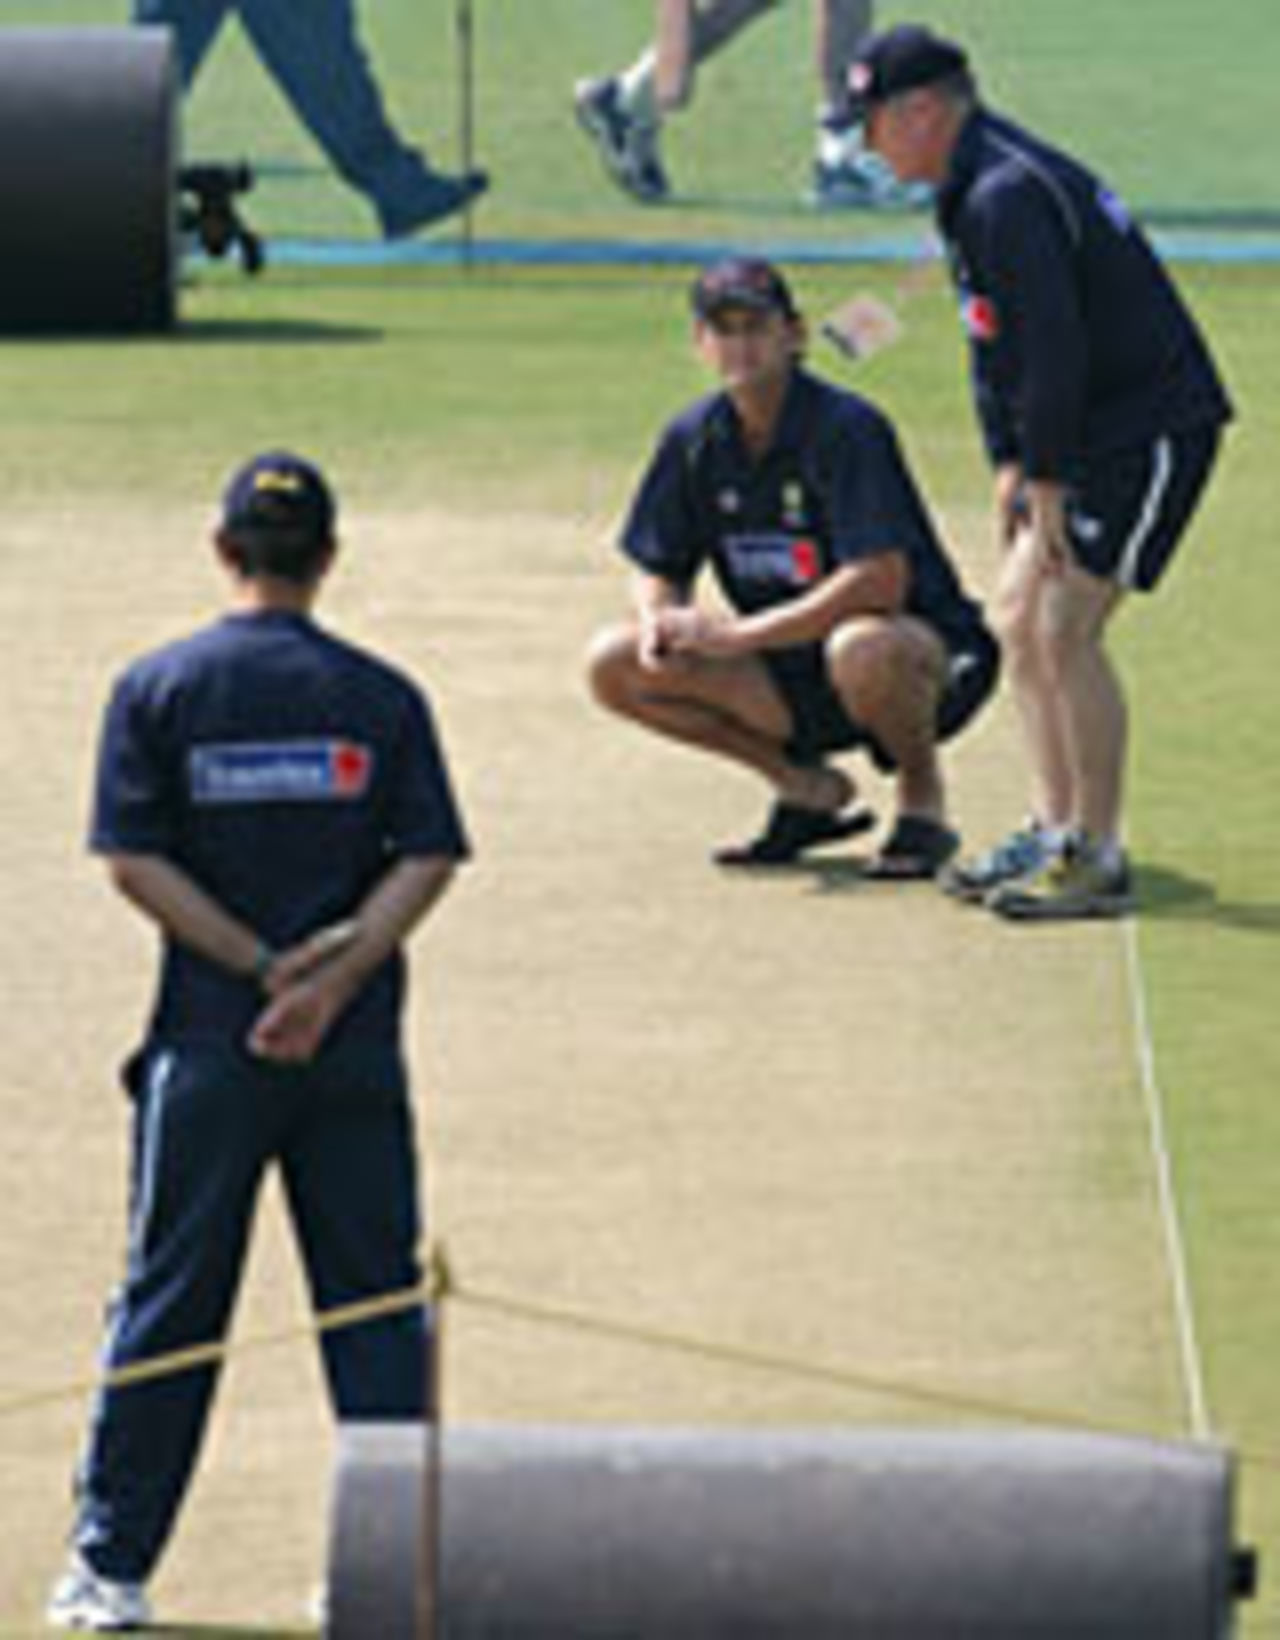 Adam Gilchrist, Ricky Ponting and selector Allan Border inspect the pitch, Nagpur, October 2004